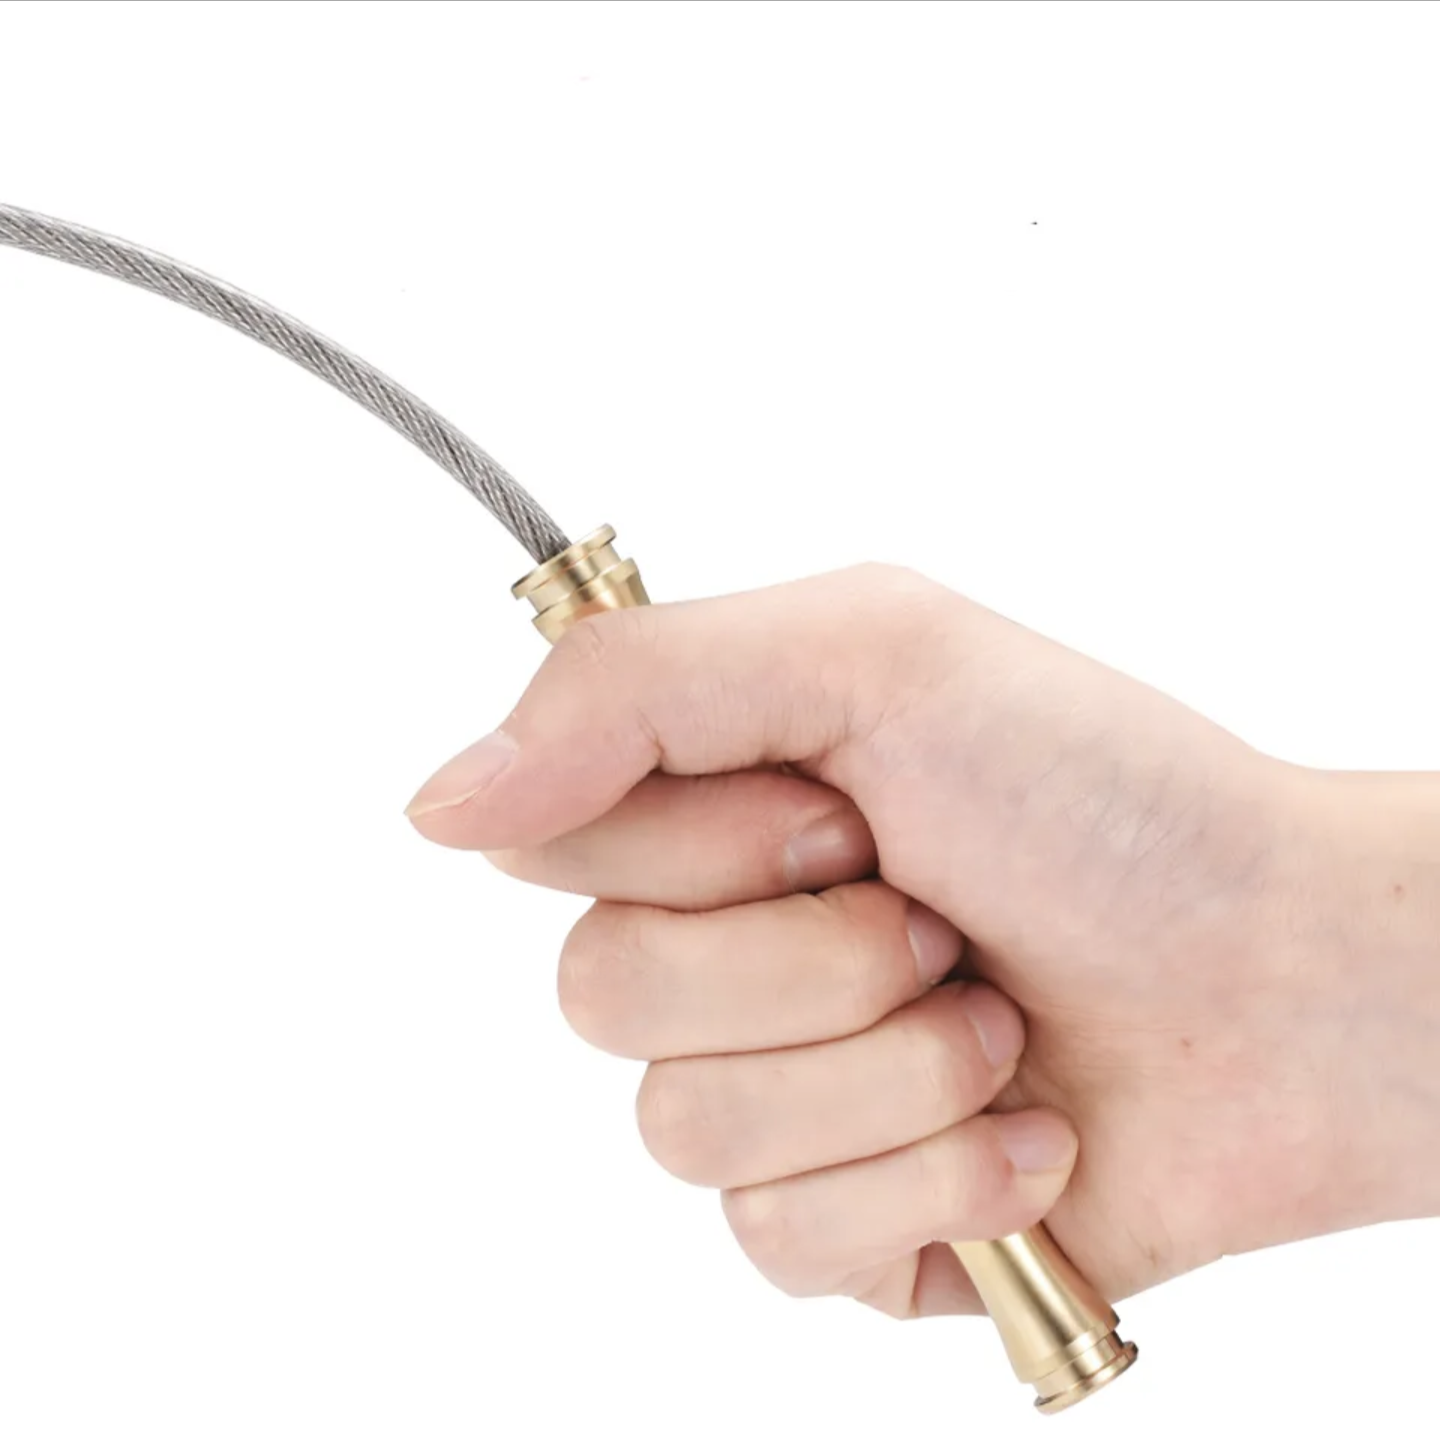 30" BRASS HANDLE STEEL CABLE WHIP